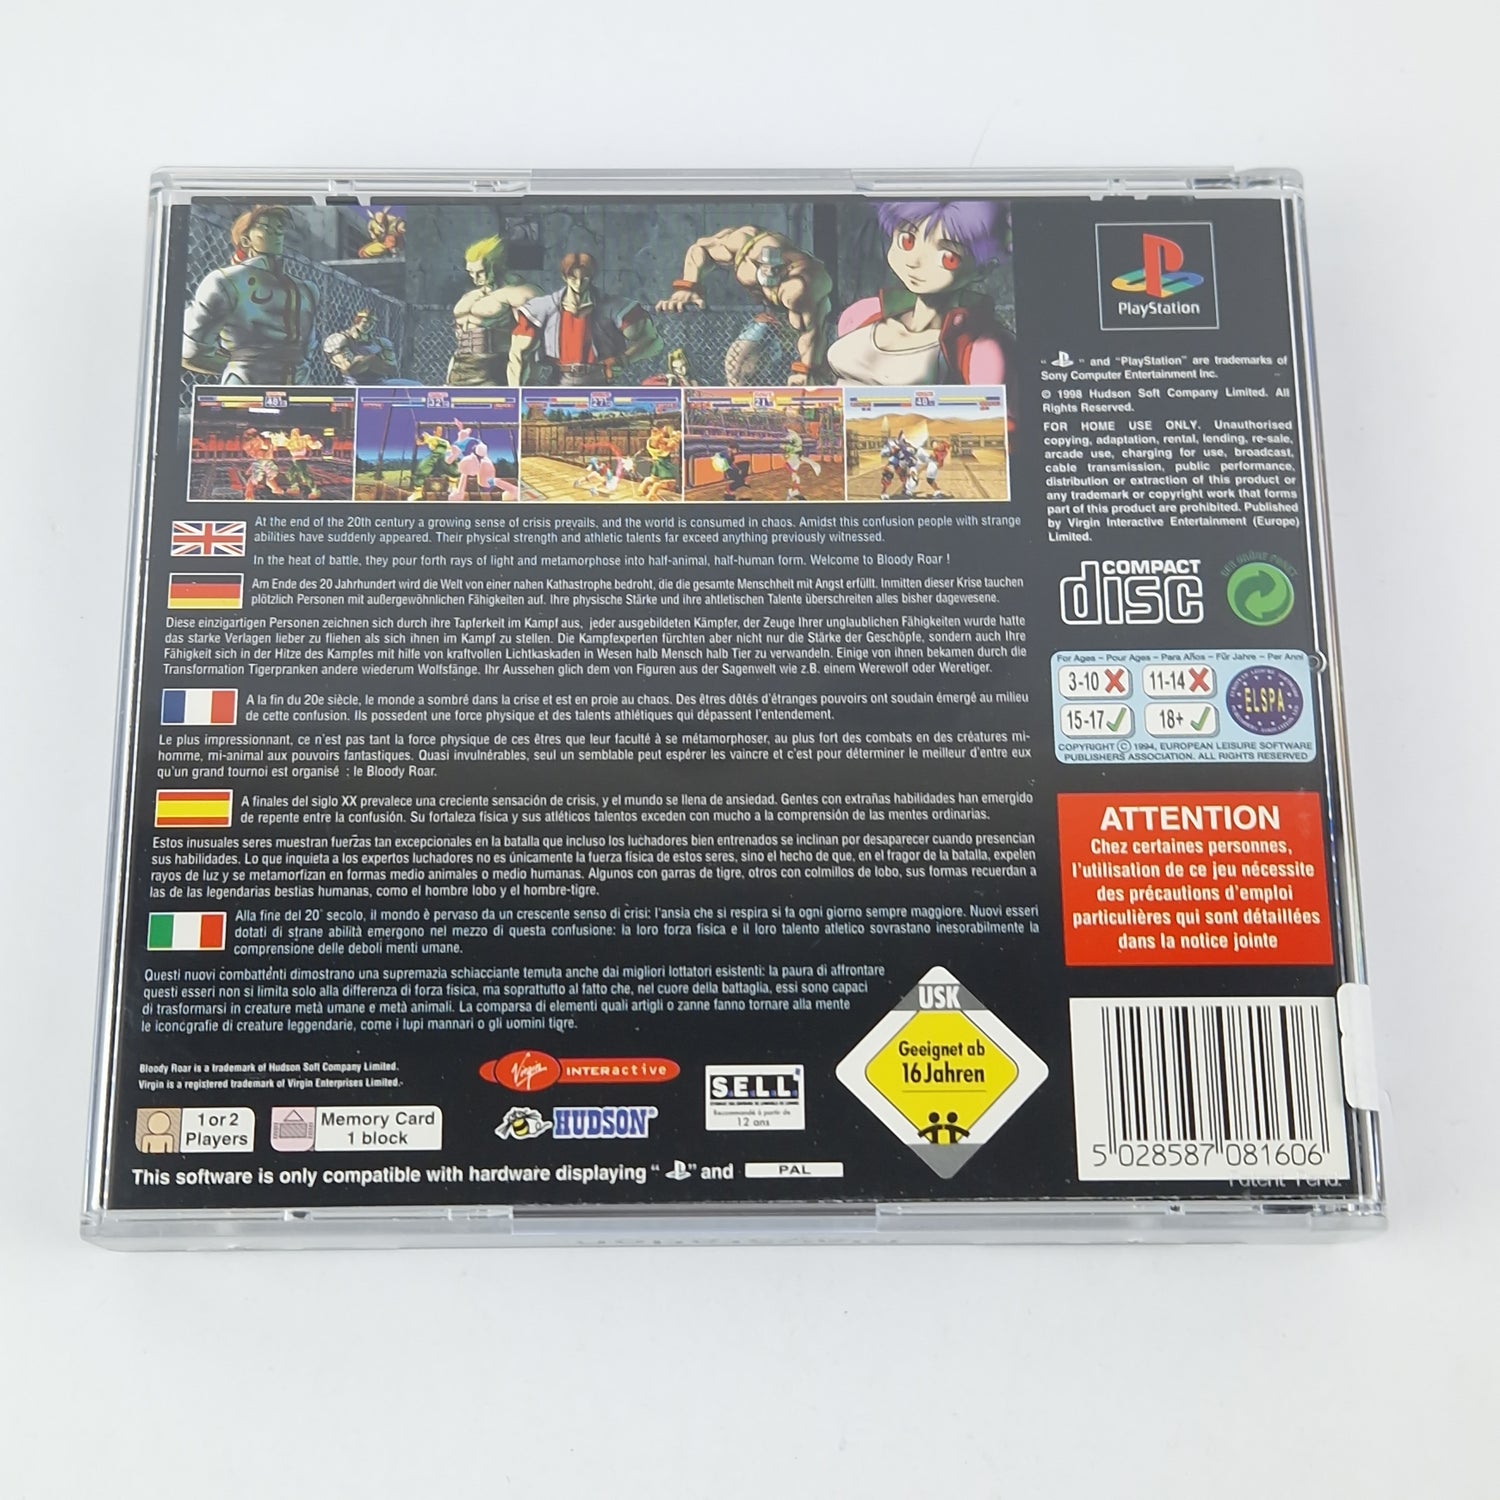 Playstation 1 Game: Hyper Beast Duel Bloody Roar - CD Instructions OVP | PS1 PSX